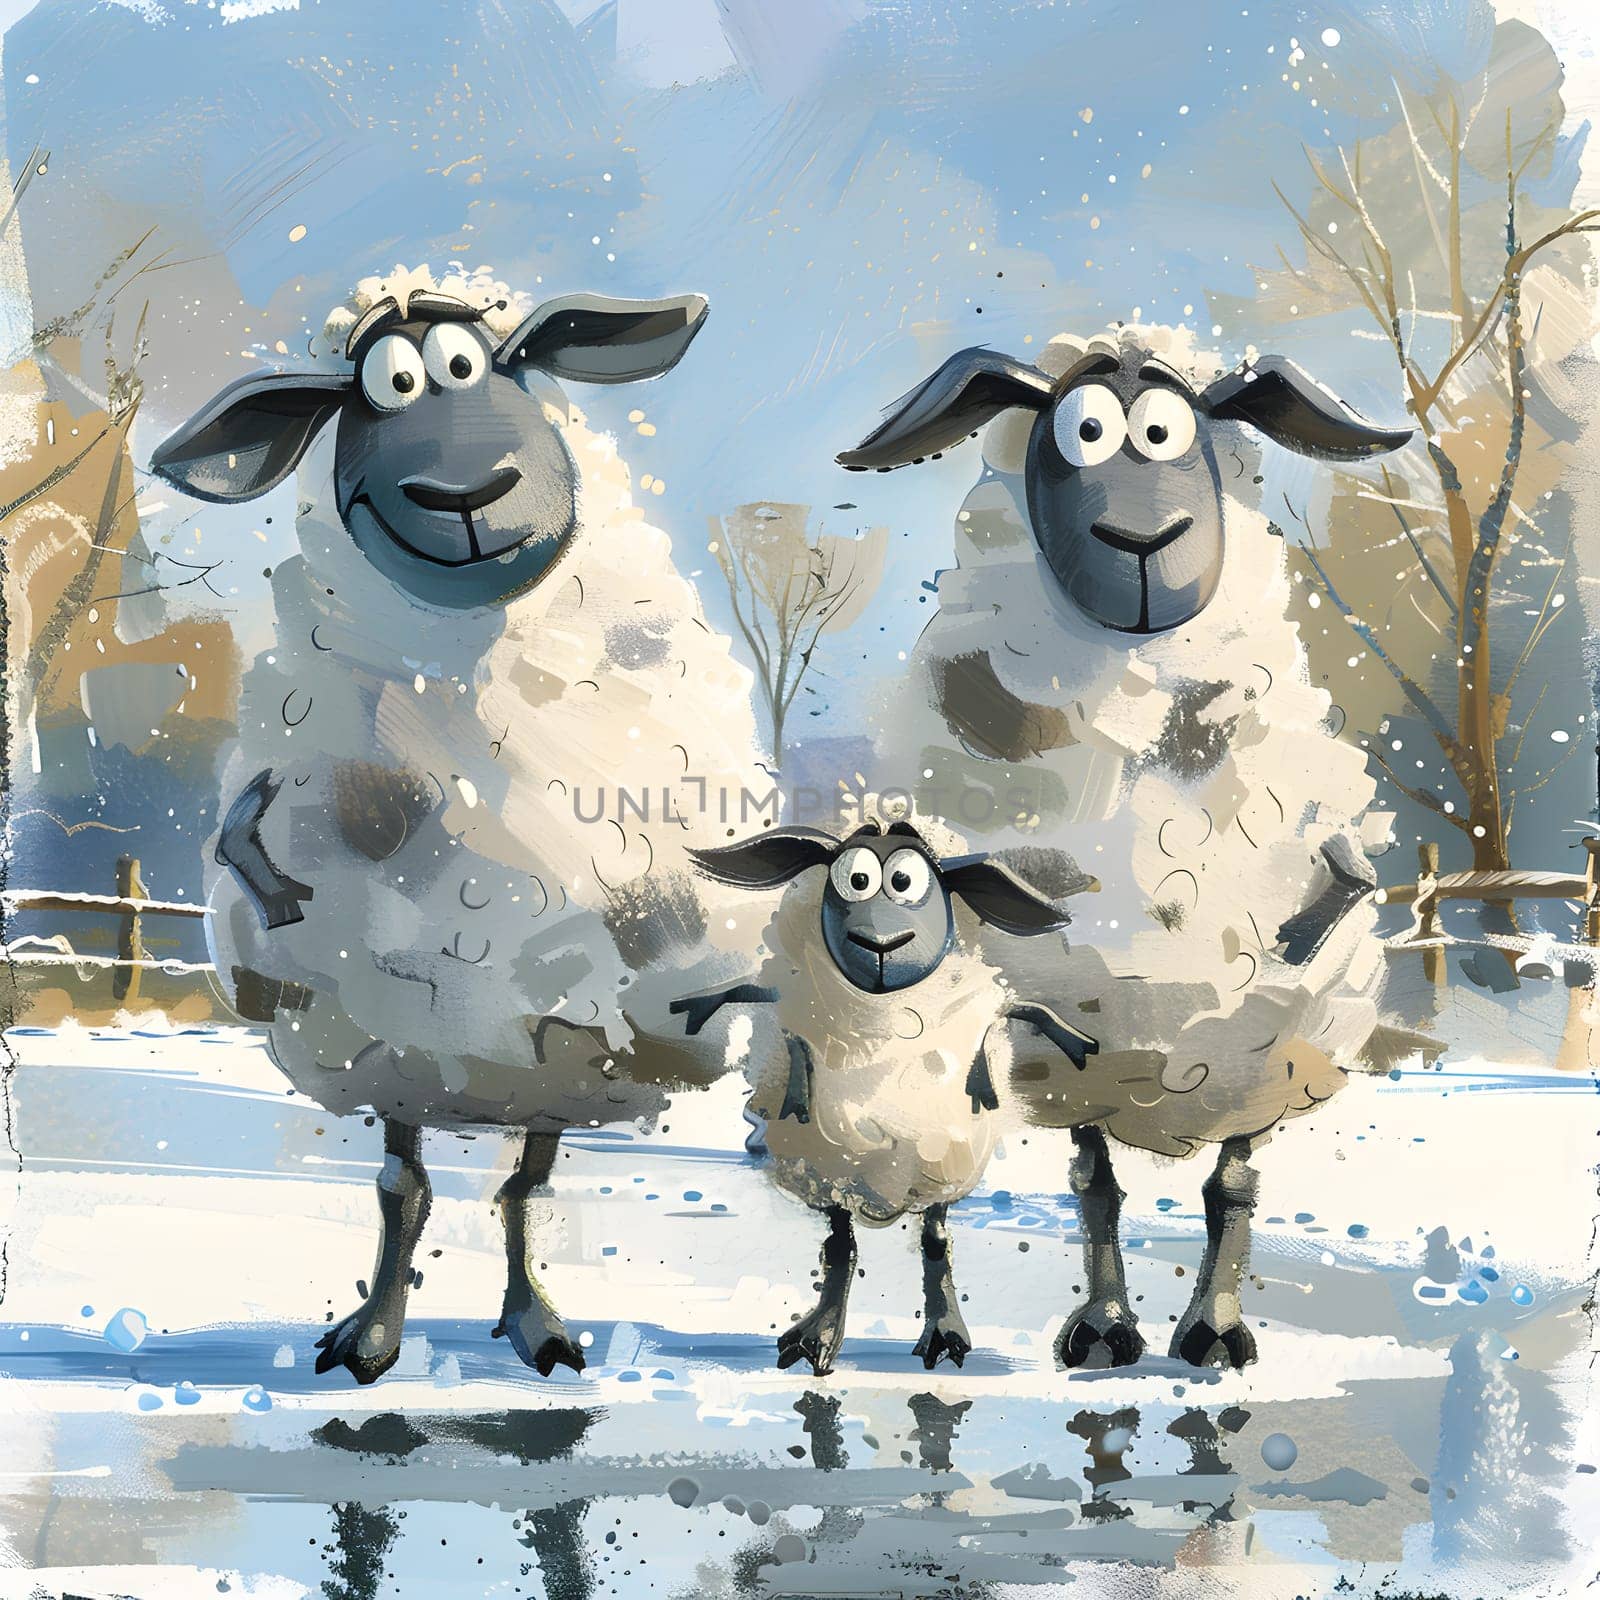 A painting of three sheep standing in the snow, showcasing the beauty of nature and terrestrial animals. The image captures the essence of a tranquil winter scene